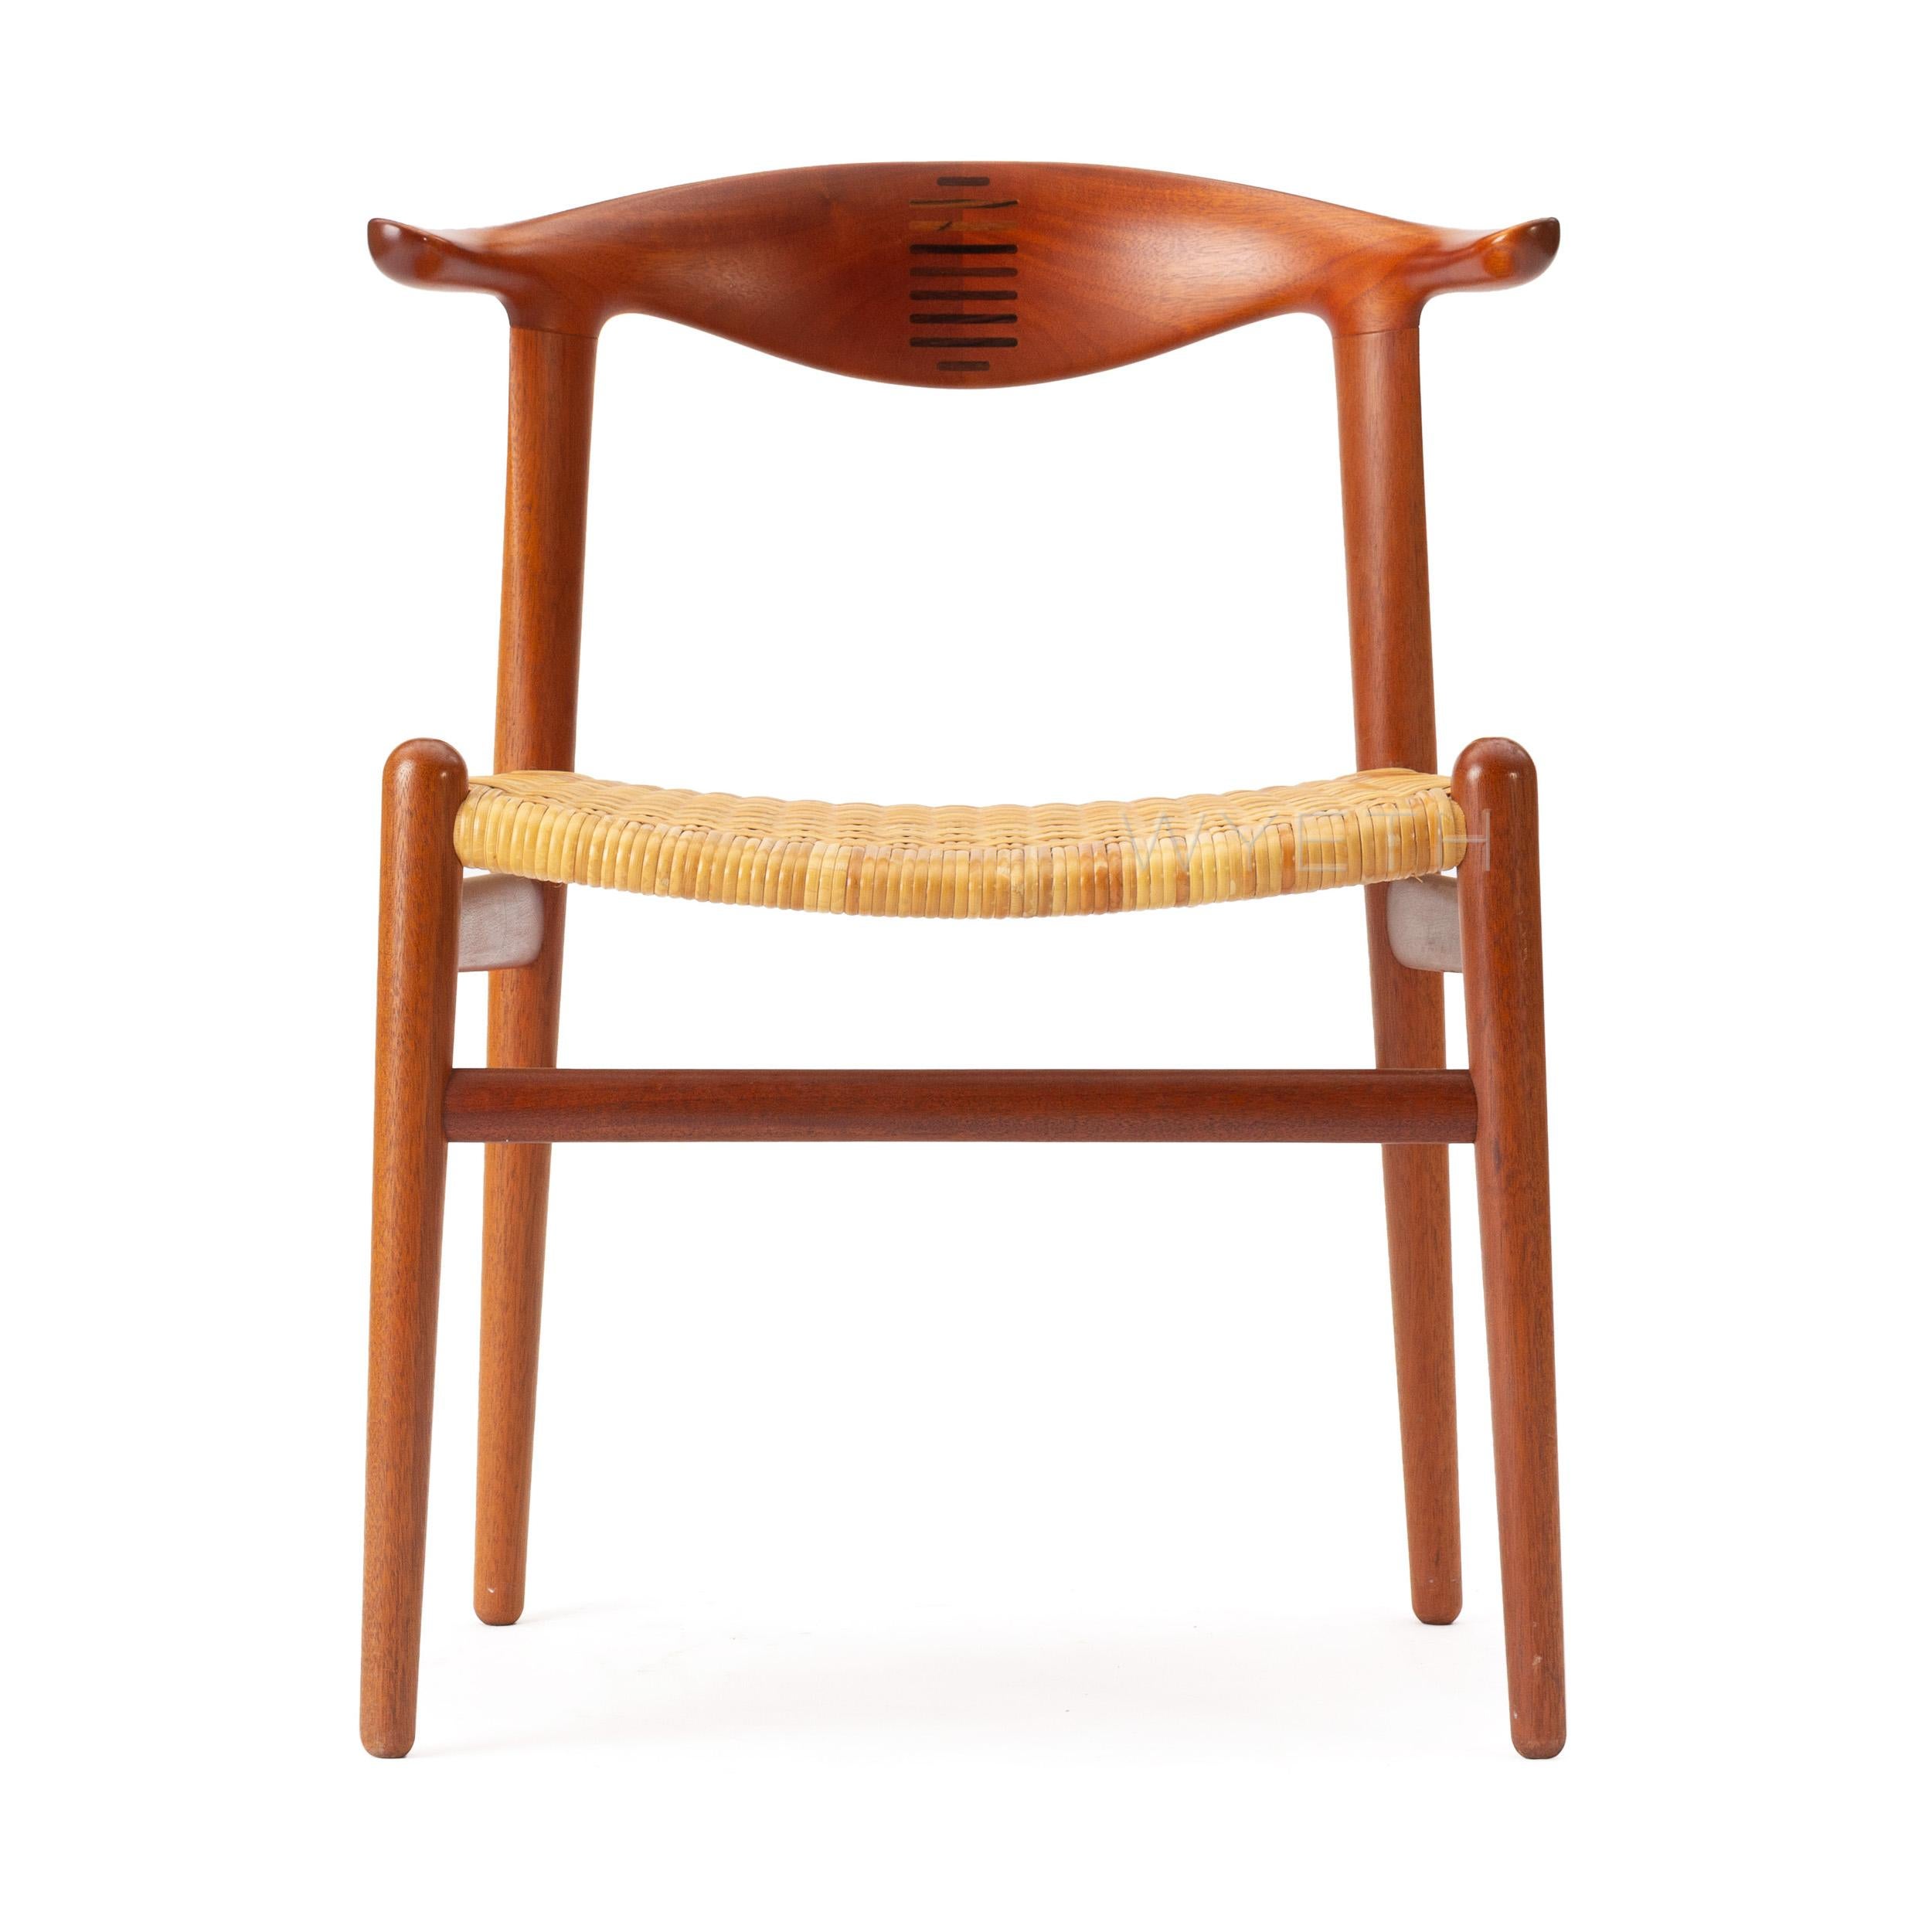 Newly restored rare teak 'cow horn' dining chair with splined backrest and cane seat. Model JH-505.